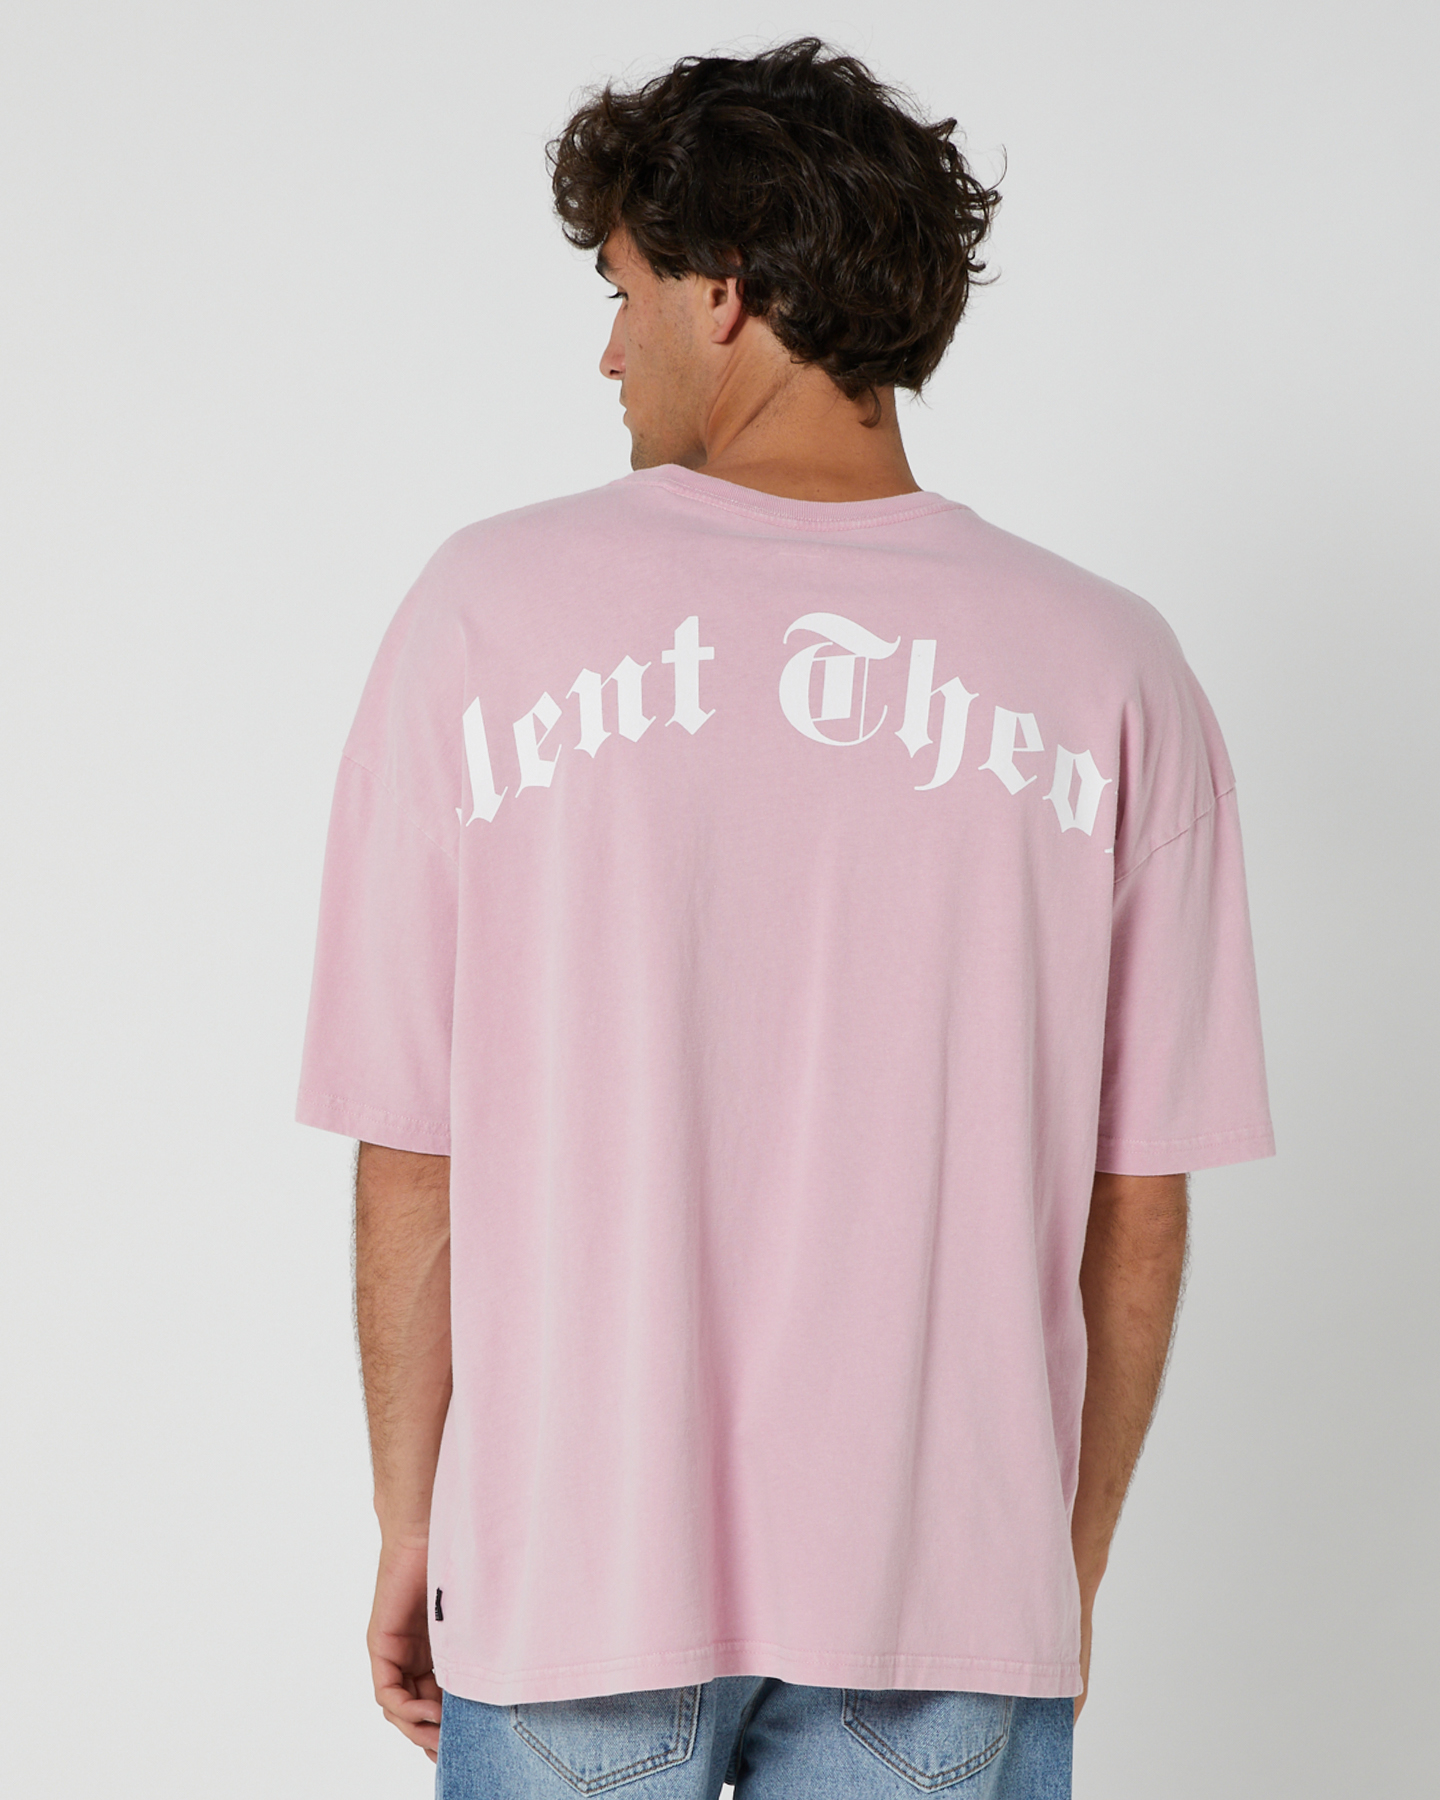 Silent Theory Machine Mens Ss | Pink Tee - SurfStitch